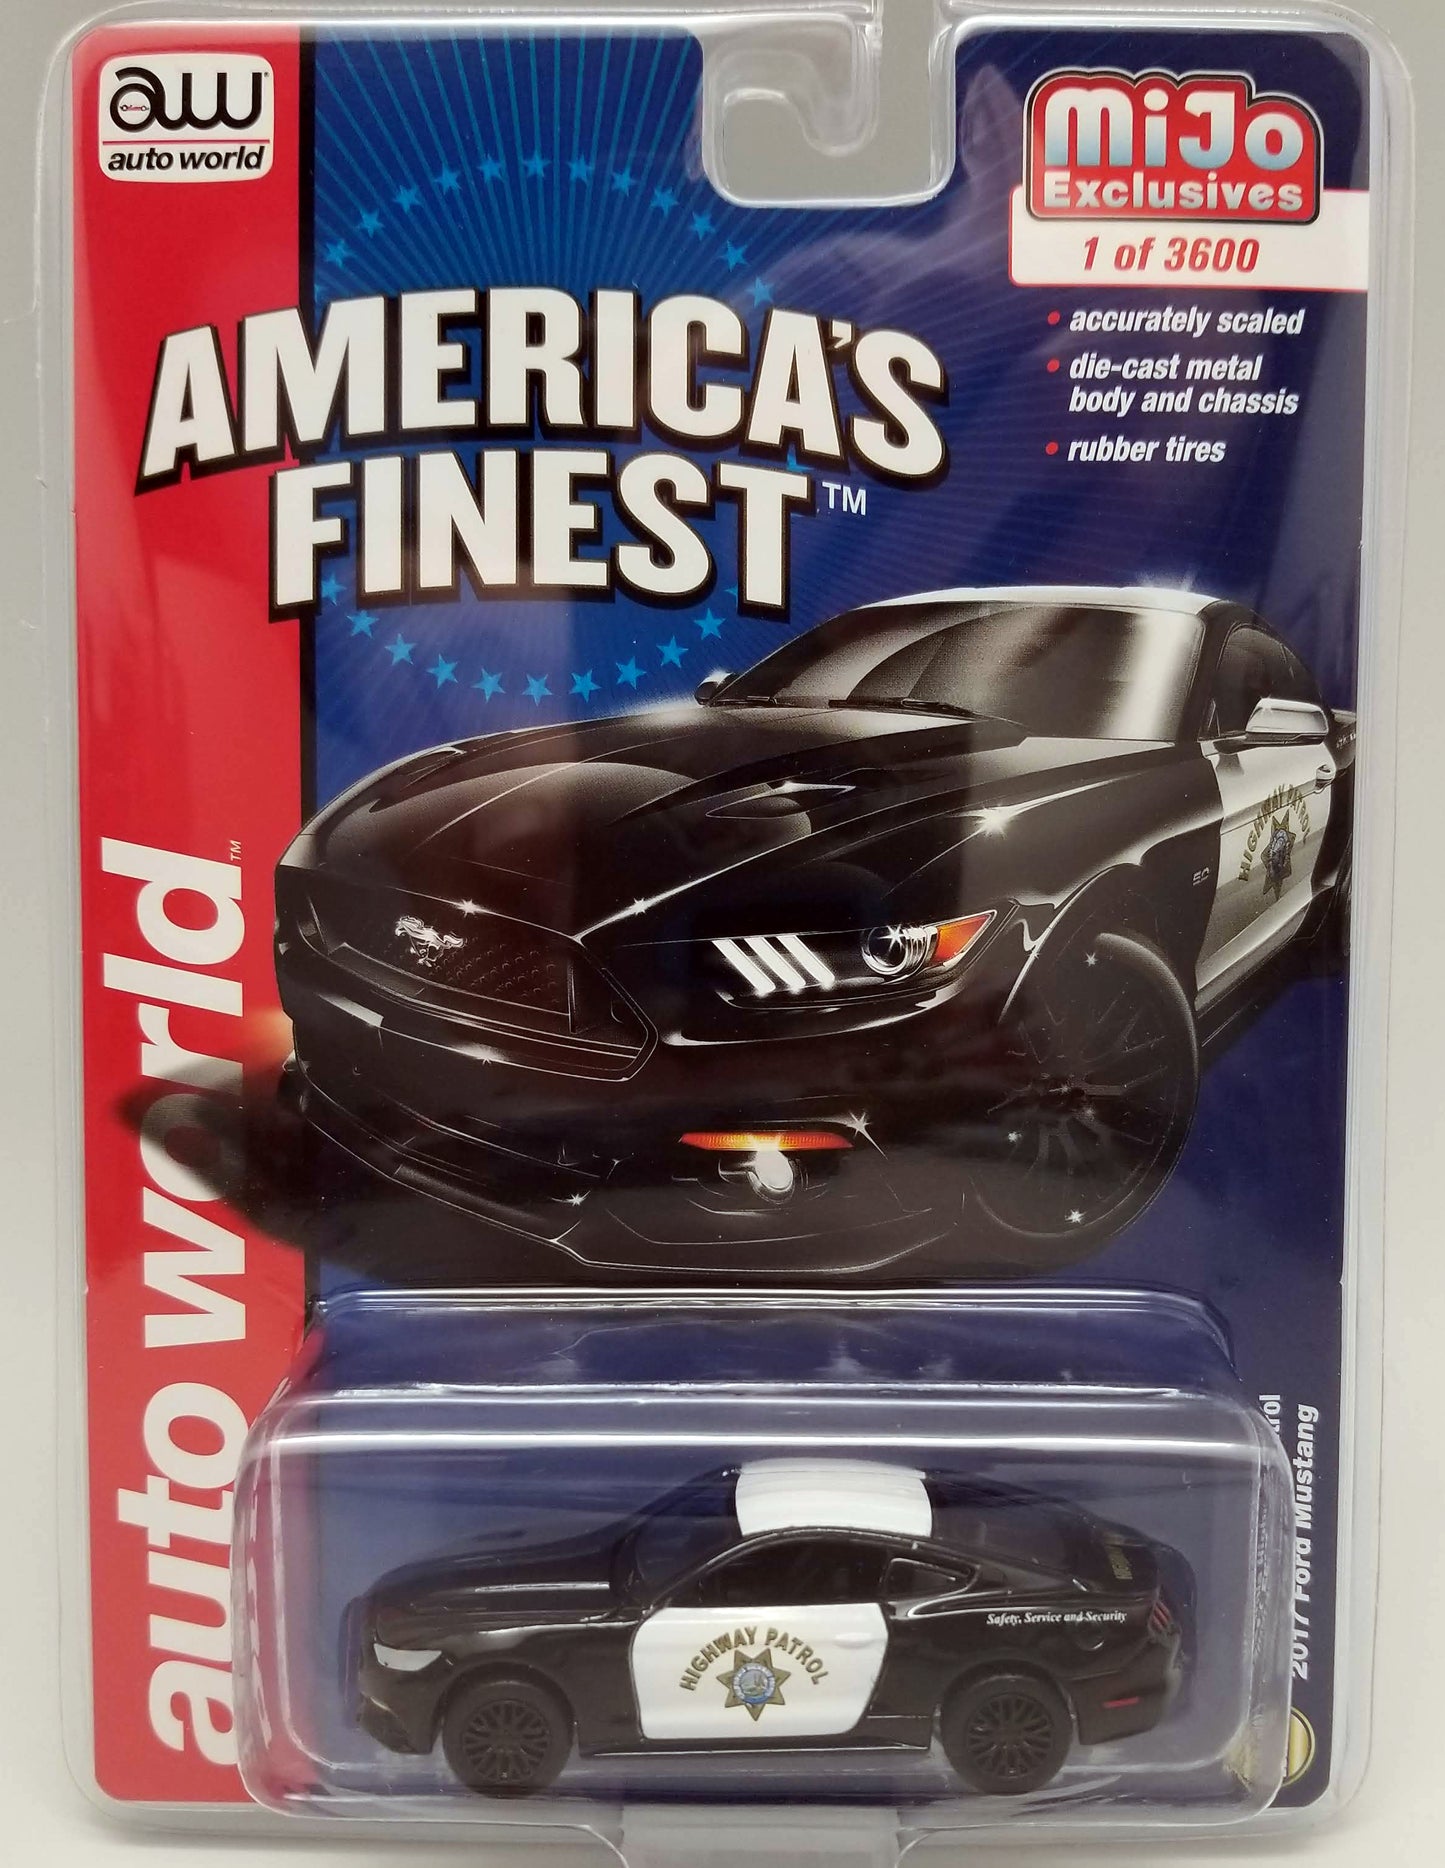 AW 2017 Ford Mustang - MiJo Exclusive - California Highway Patrol